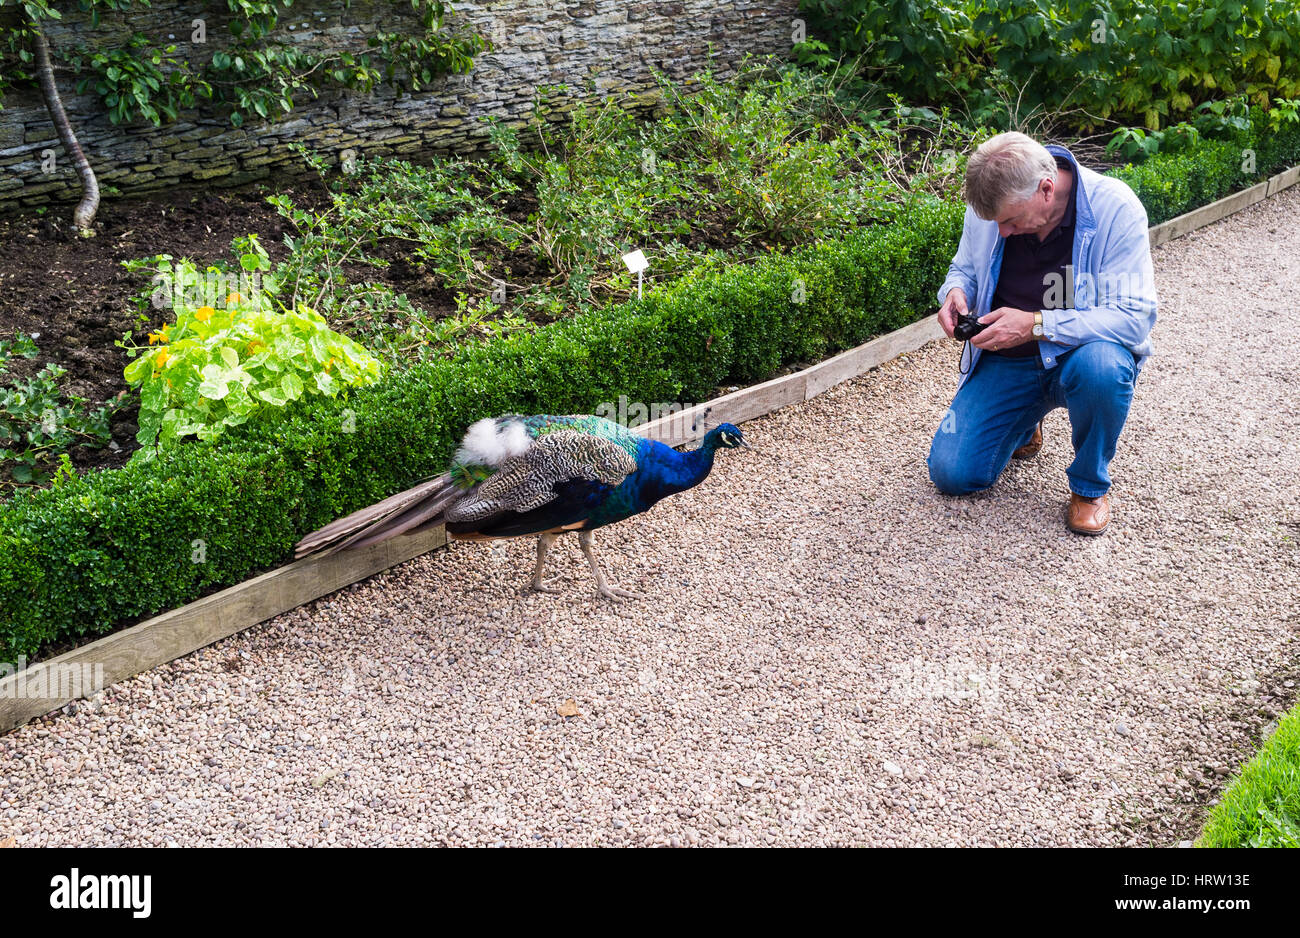 A male tries to take a photo of a friendly peacock in a garden In Devon, UK. Stock Photo